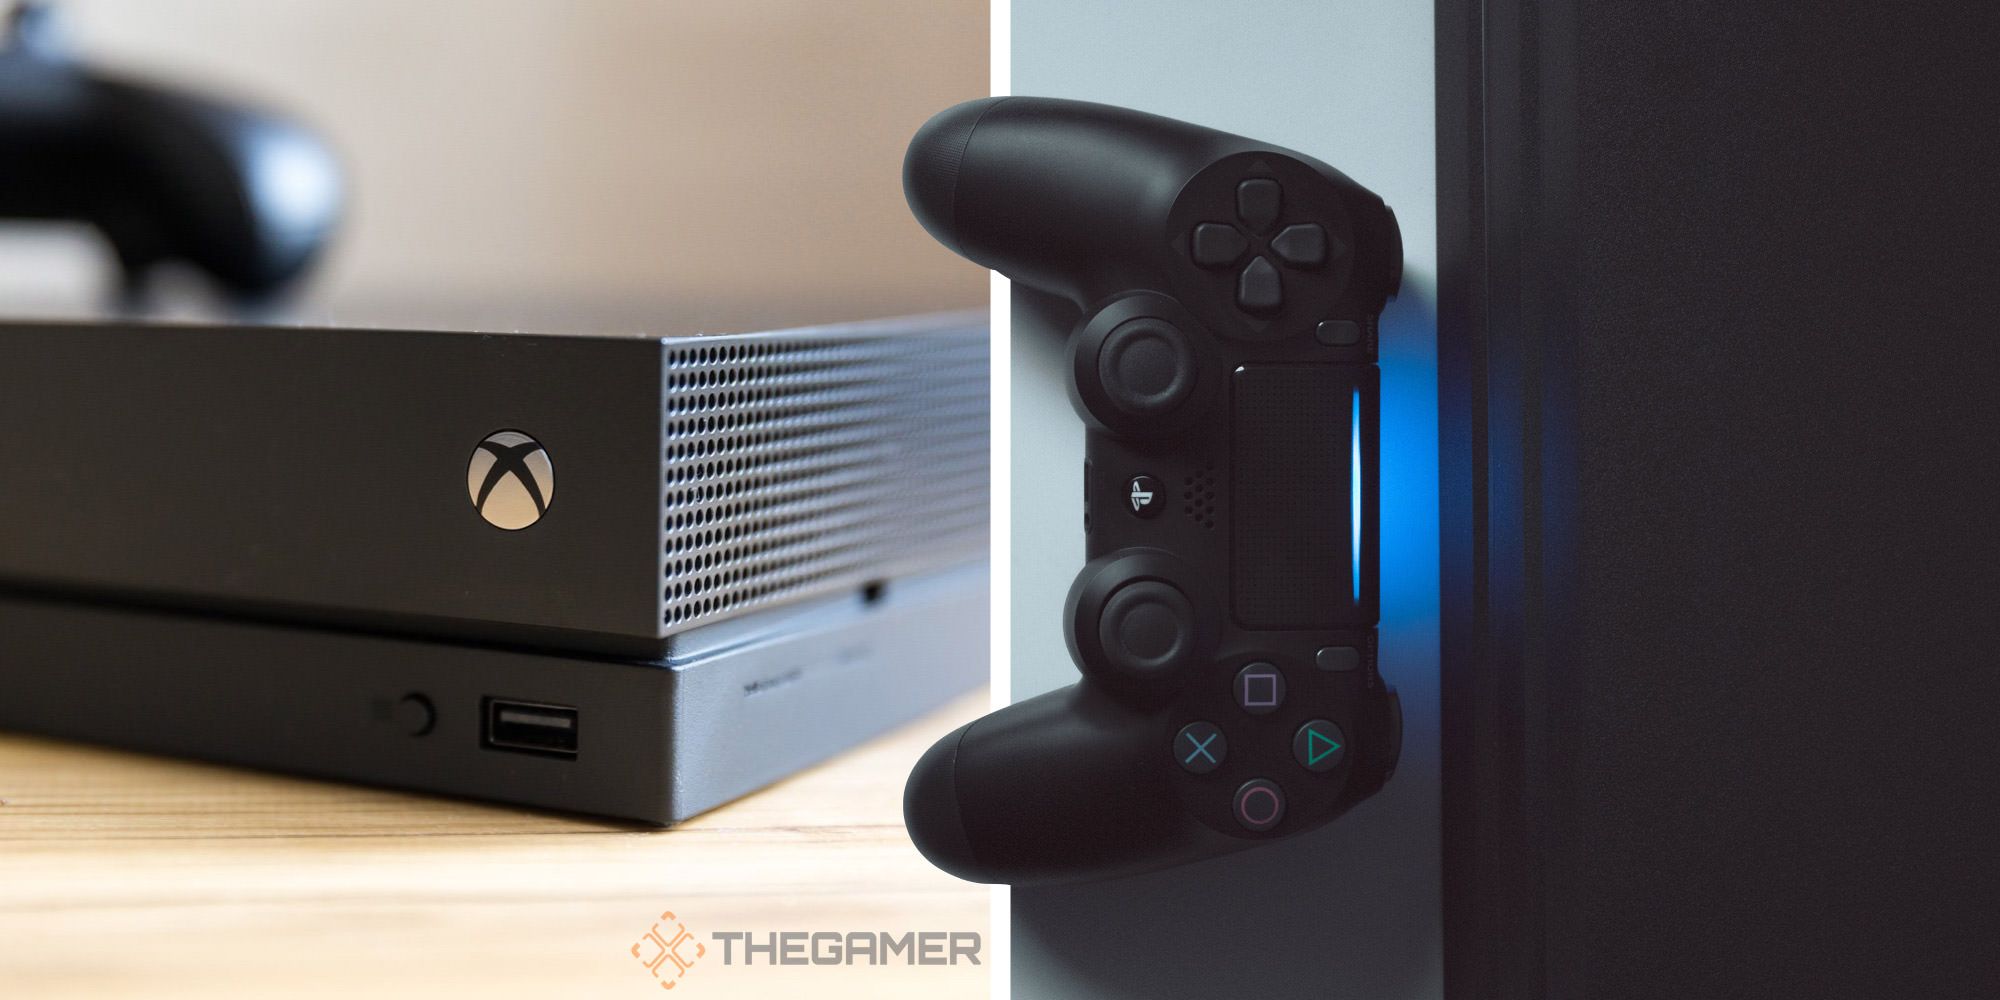 Split image of Xbox One X and PS4 Pro